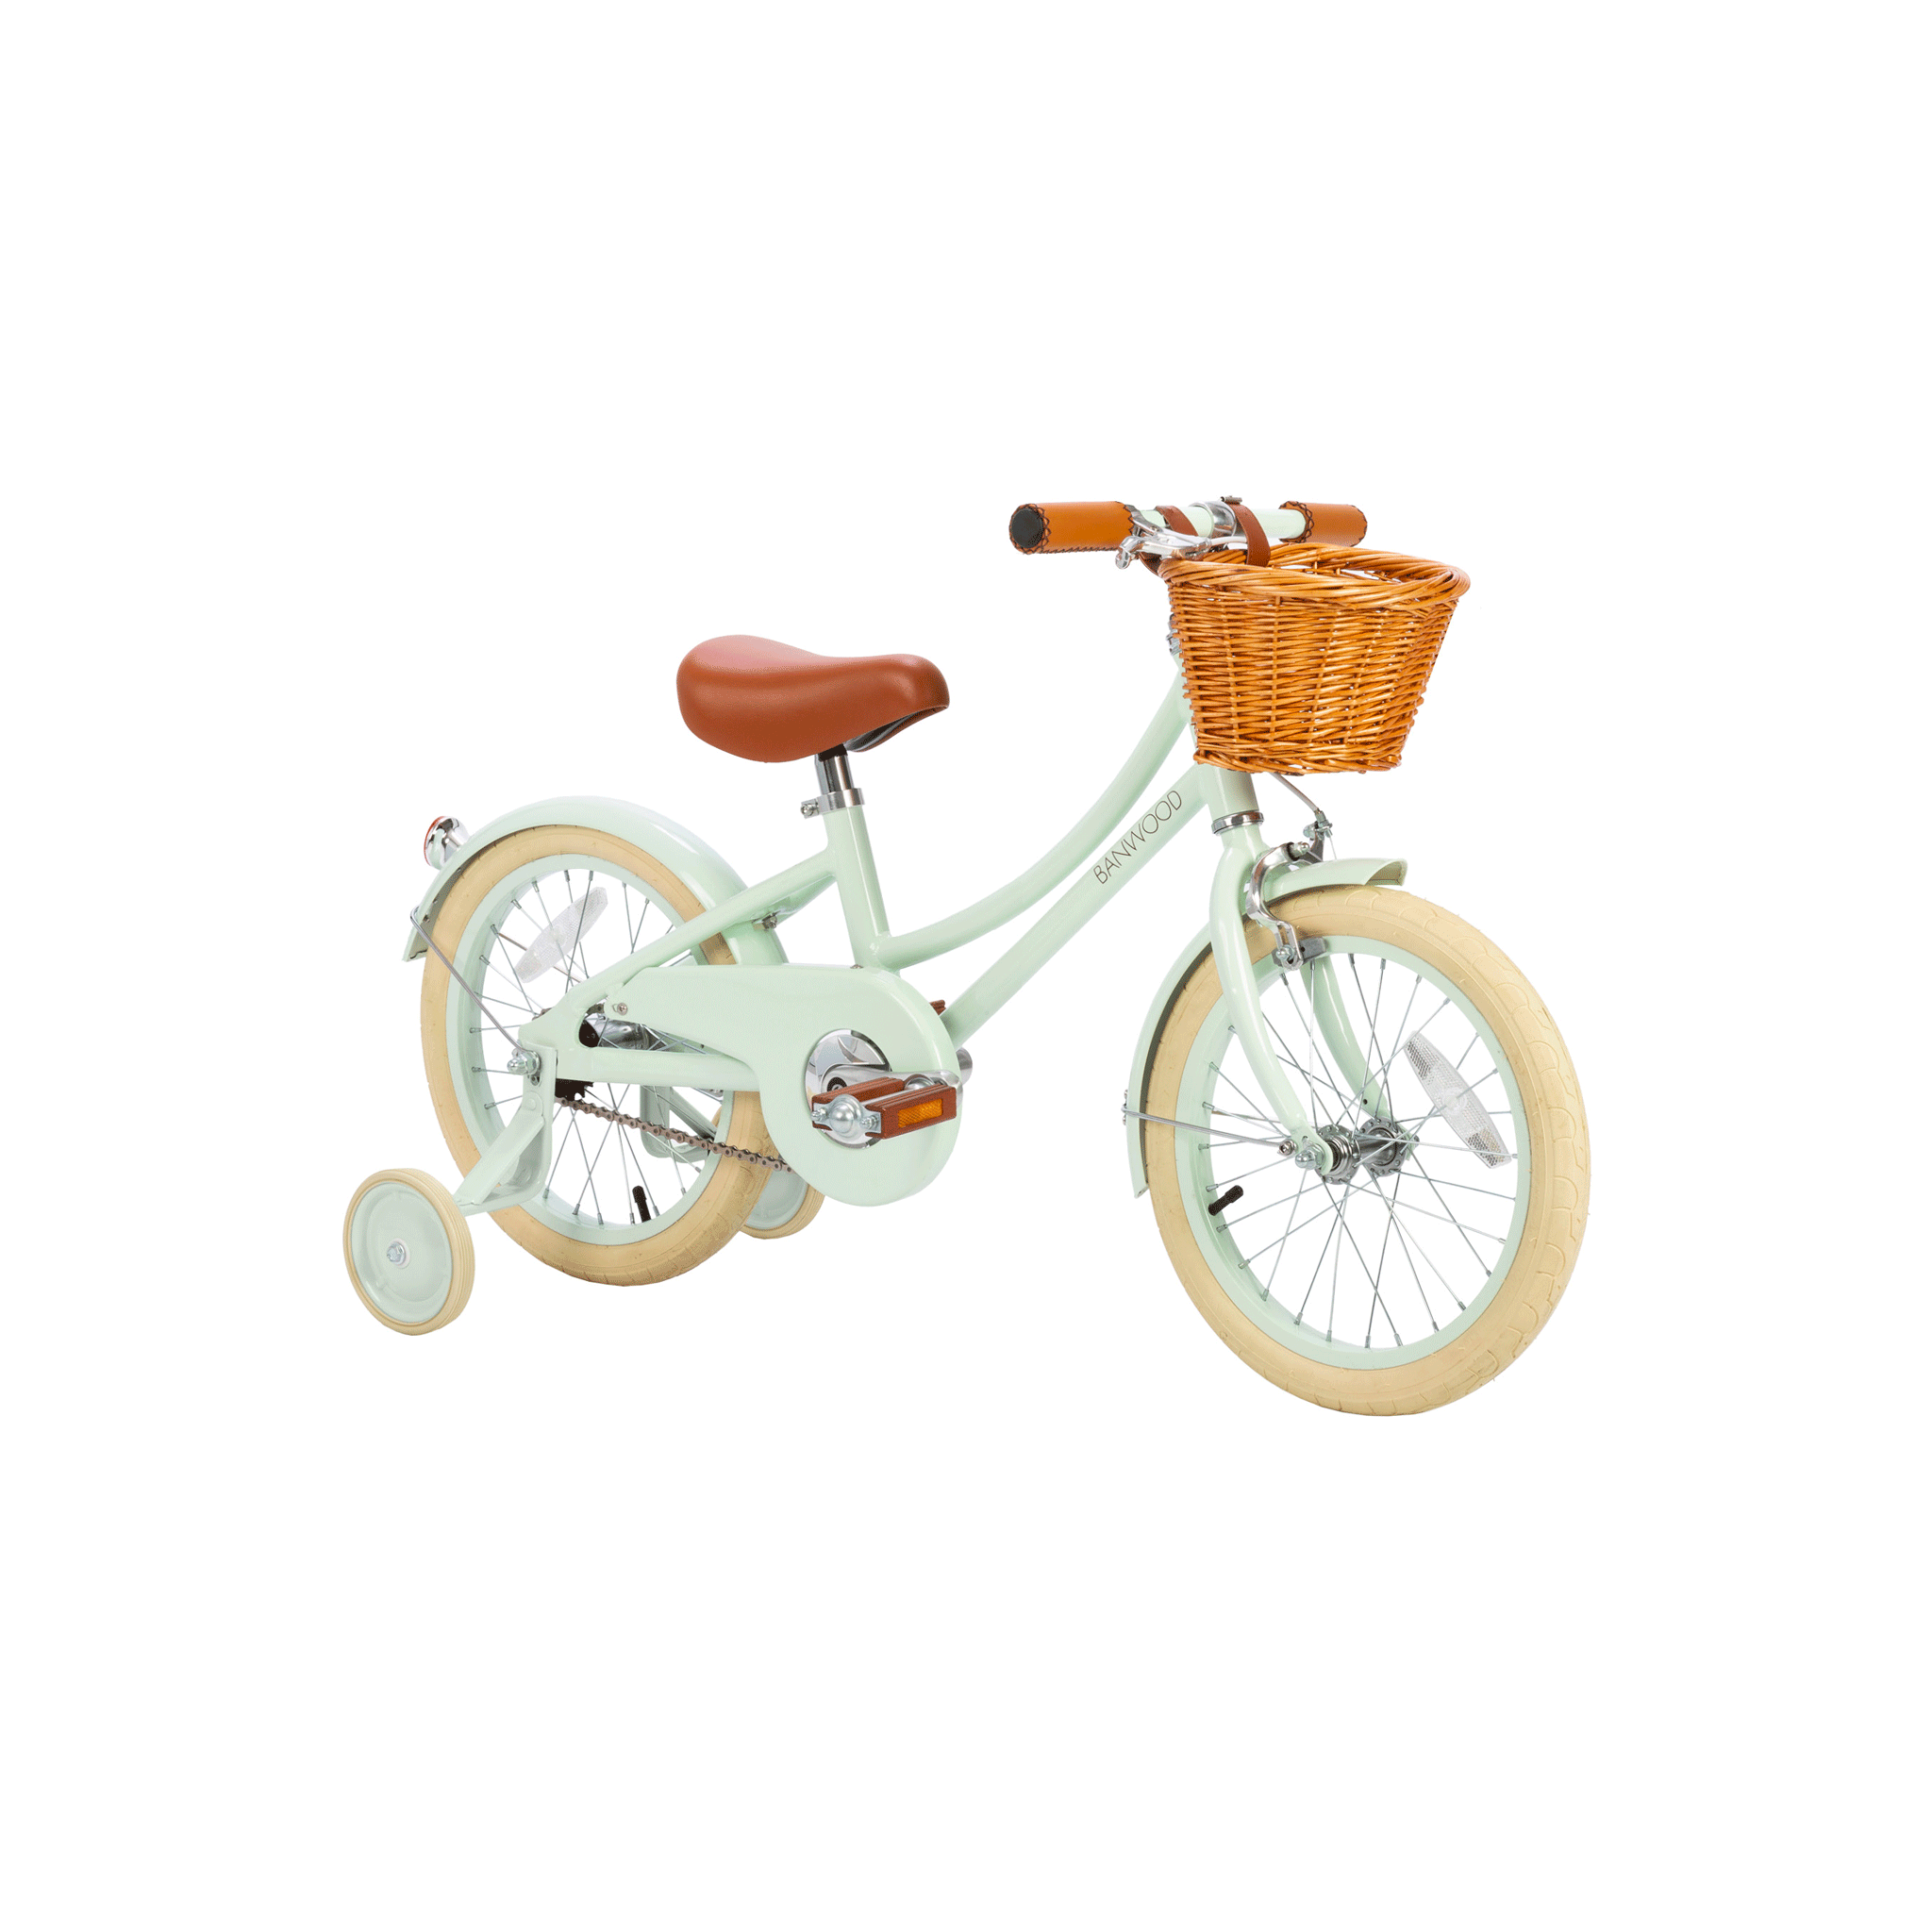 Classic Bicycle - Pale Mint